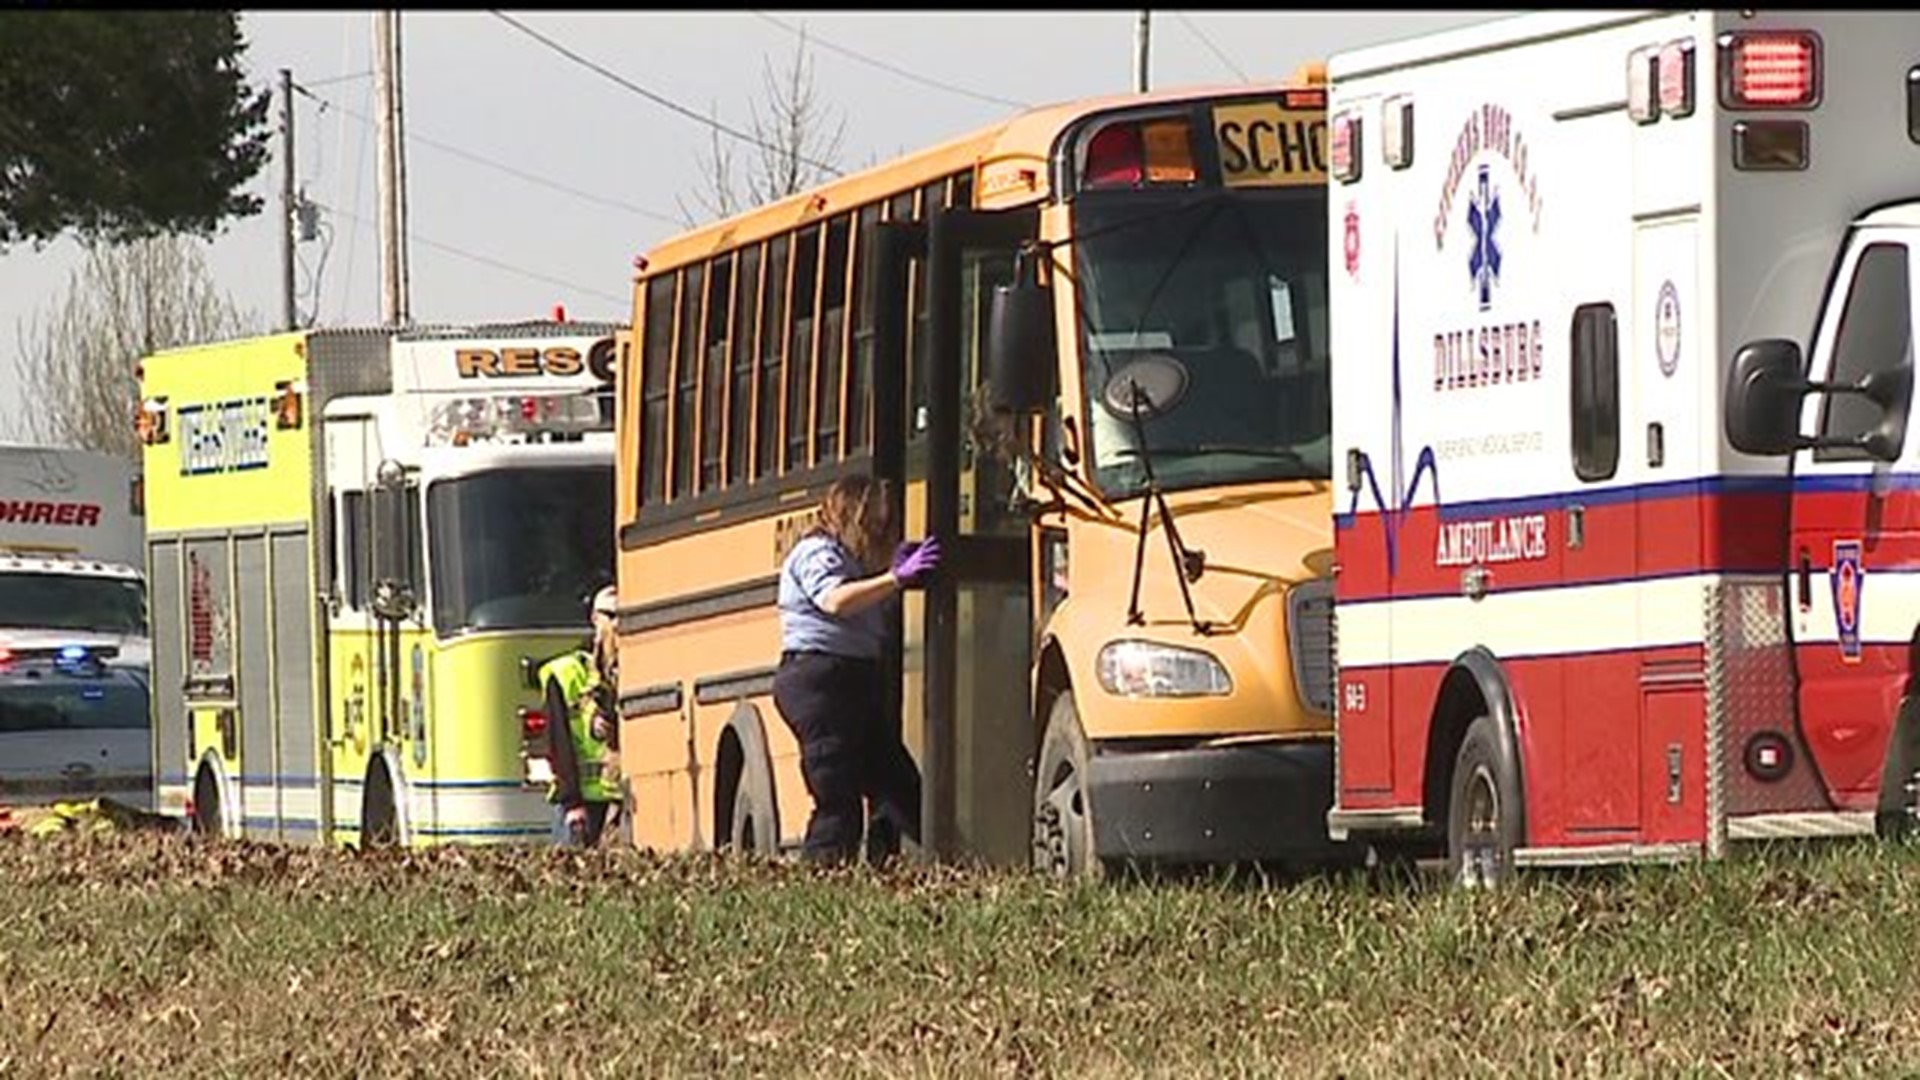 Bus crashes while avoiding deer in York County